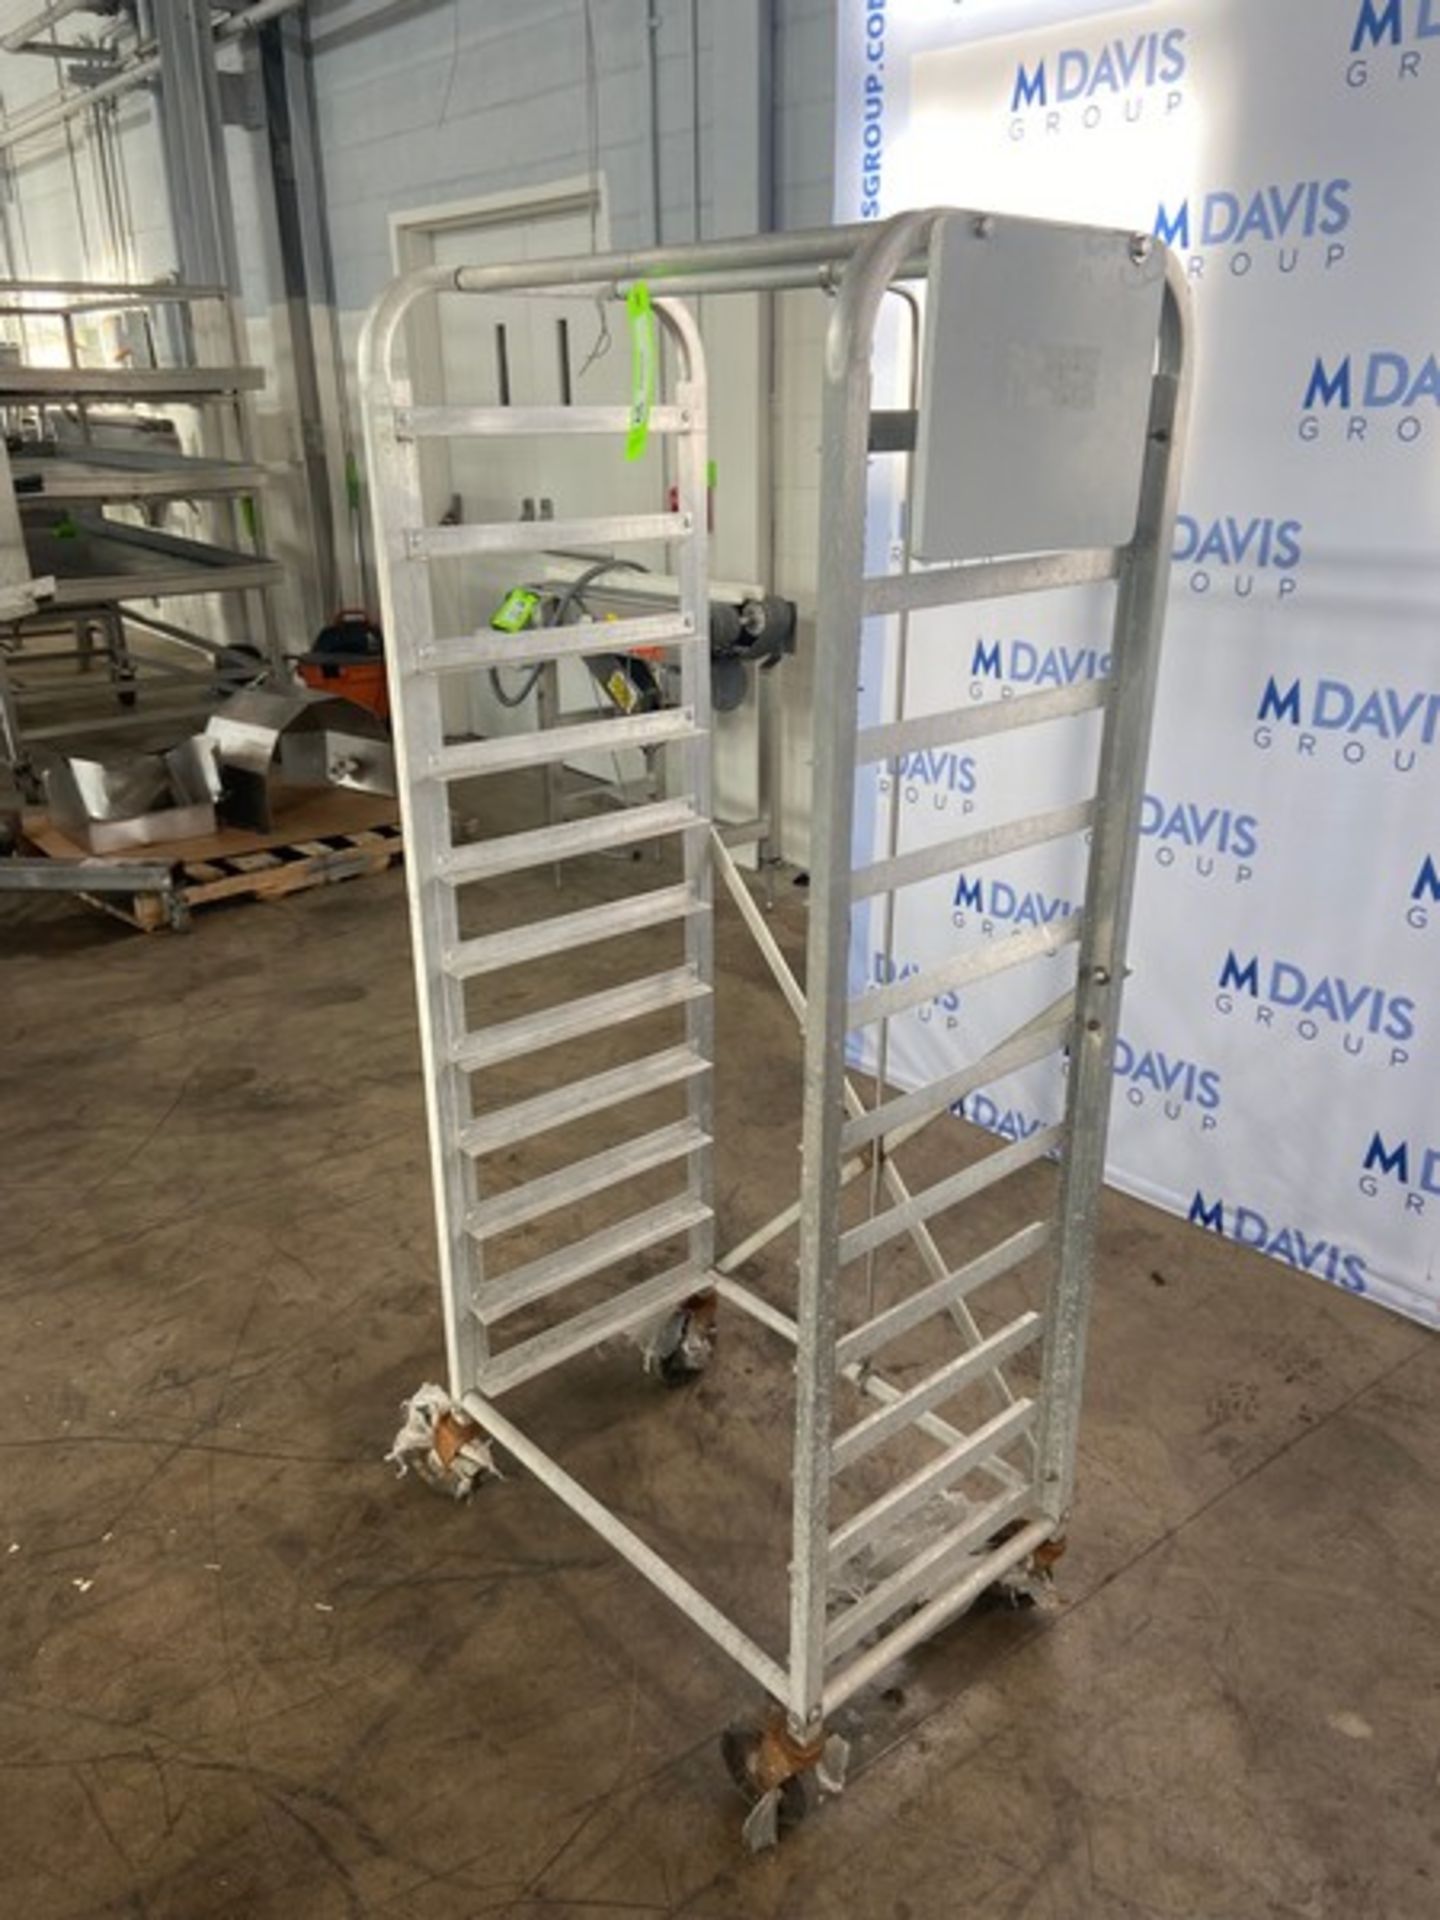 11-Slot Bakery Pan Rack,Mounted on (4) Casters (INV#88959) (Located @ the MDG Auction Showroom 2.0 - Image 2 of 3